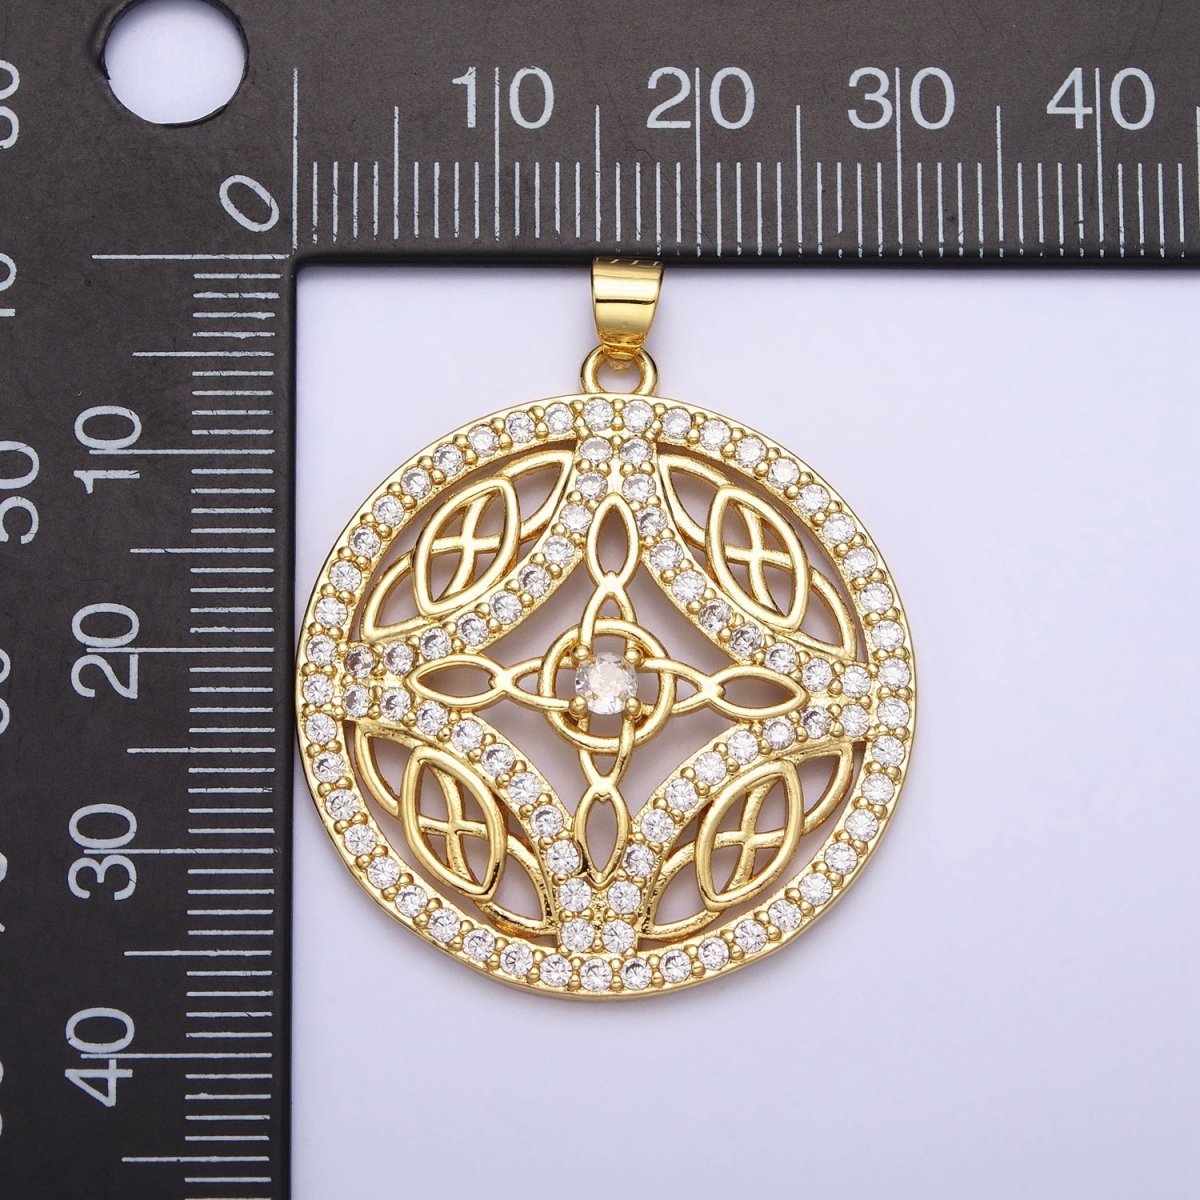 Statement Medallion Pendant Micro Pave Round Disc Charm in 24k Gold Filled AA256 - DLUXCA